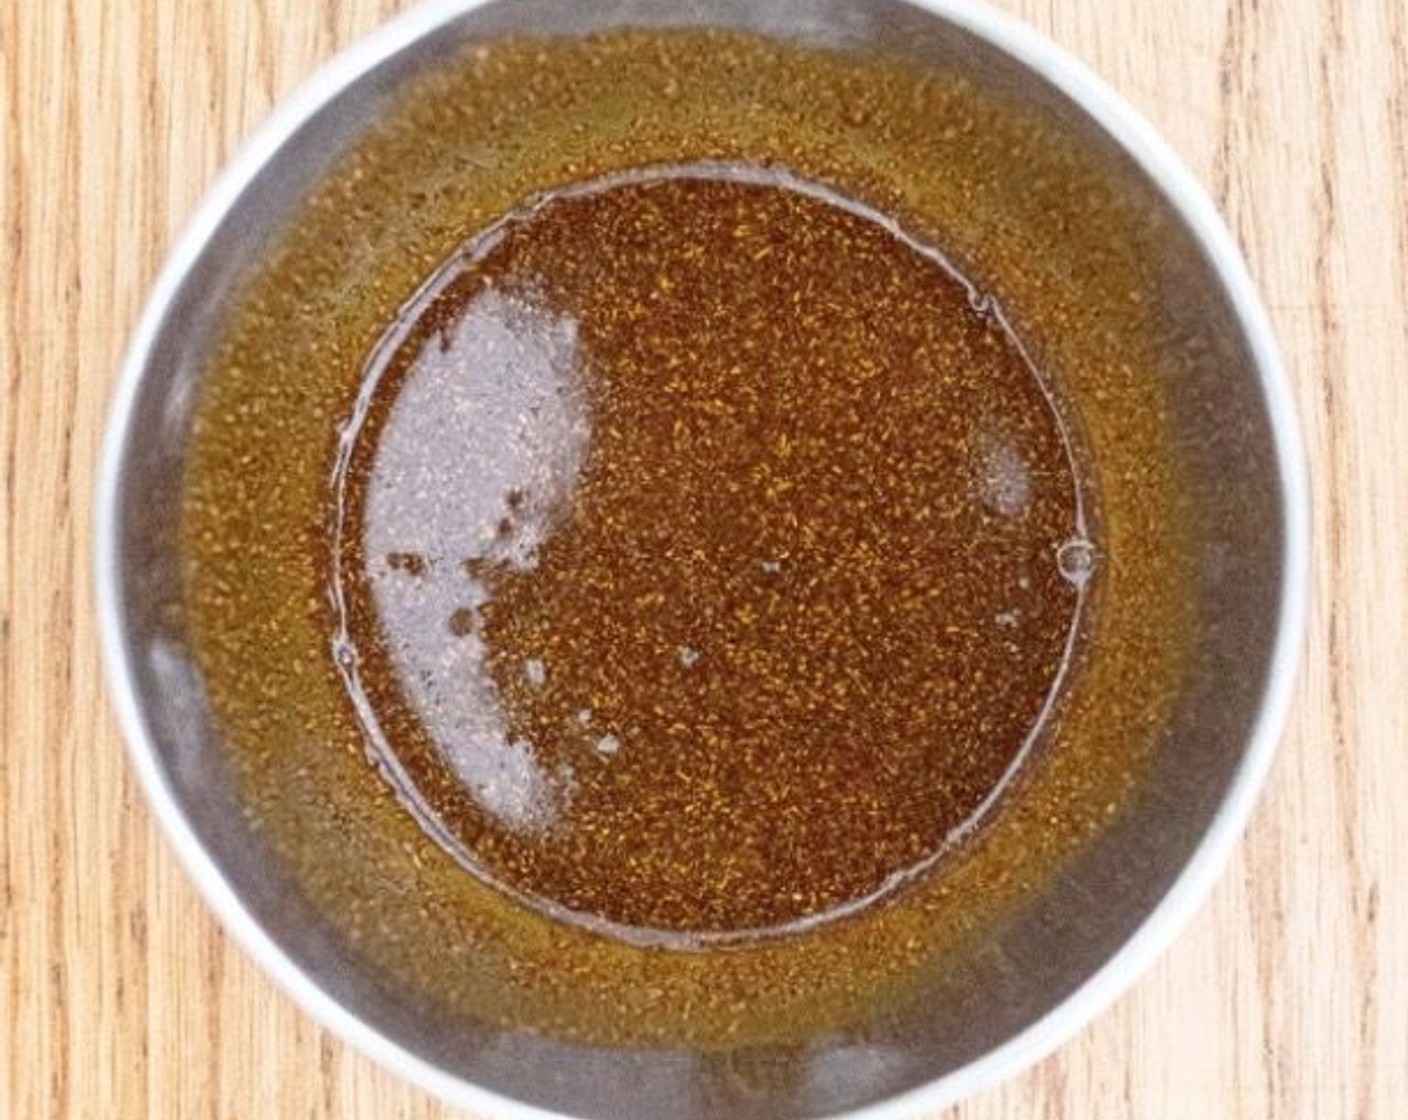 step 2 Meanwhile, mix Curry Powder (1 Tbsp), Salt (1/4 tsp), Light Soy Sauce (1 Tbsp), Dark Soy Sauce (1/2 tsp), and Chili Powder (1 pinch) in a small bowl. Stir well and set aside.